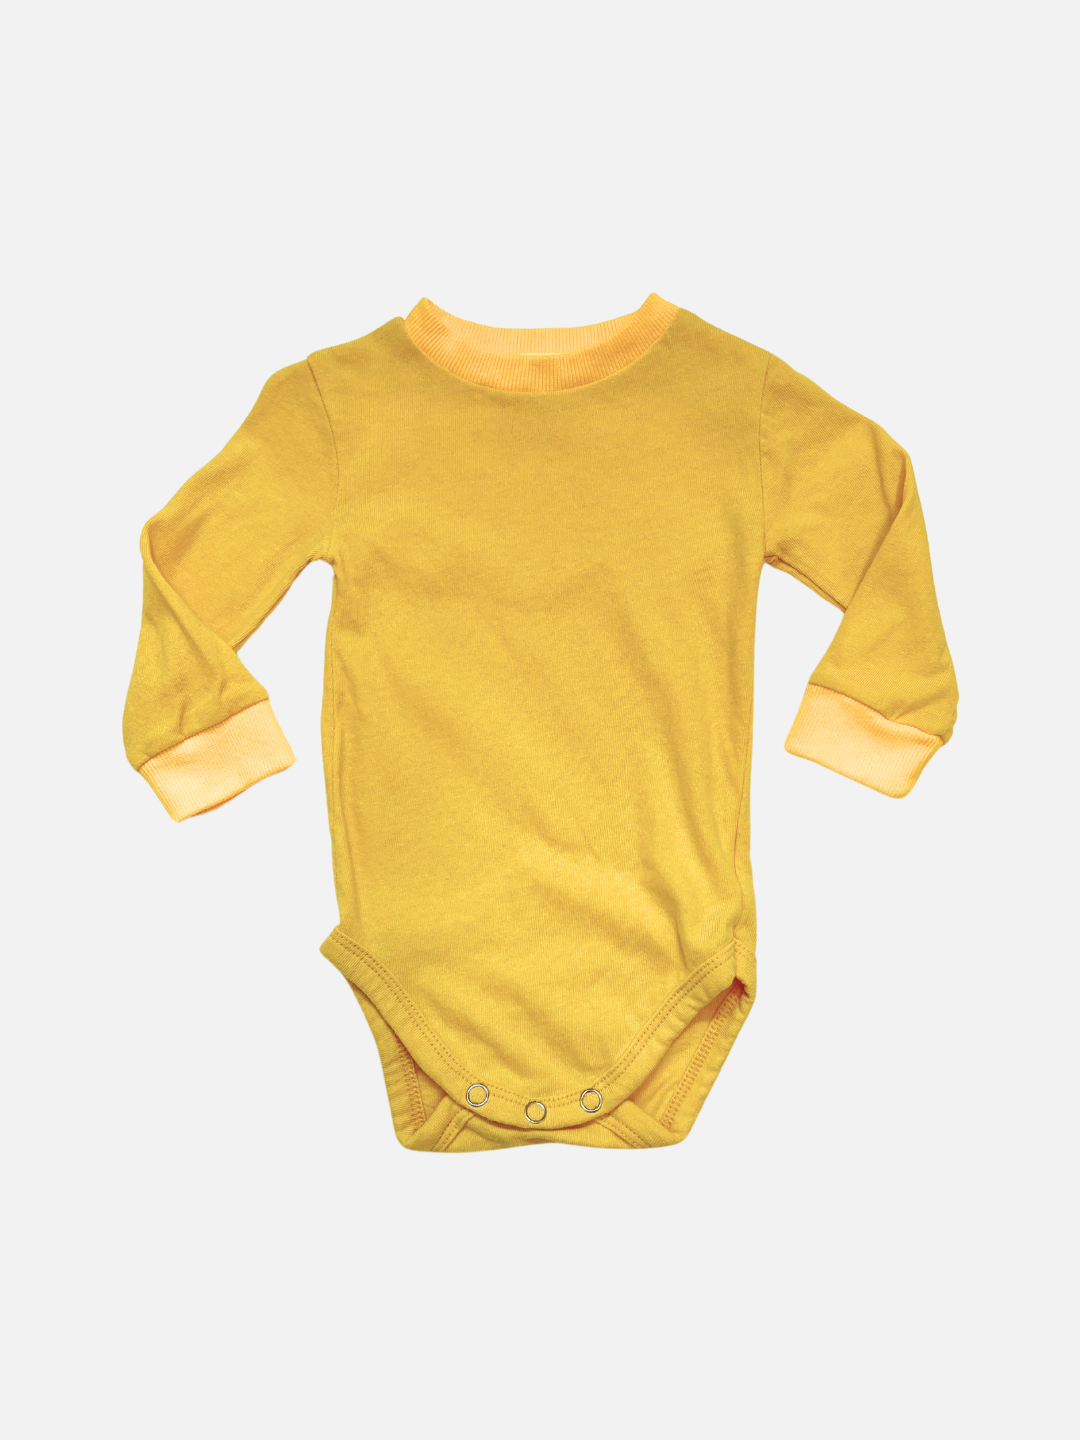 Yellow | A front view of the baby patch onesie in yellow